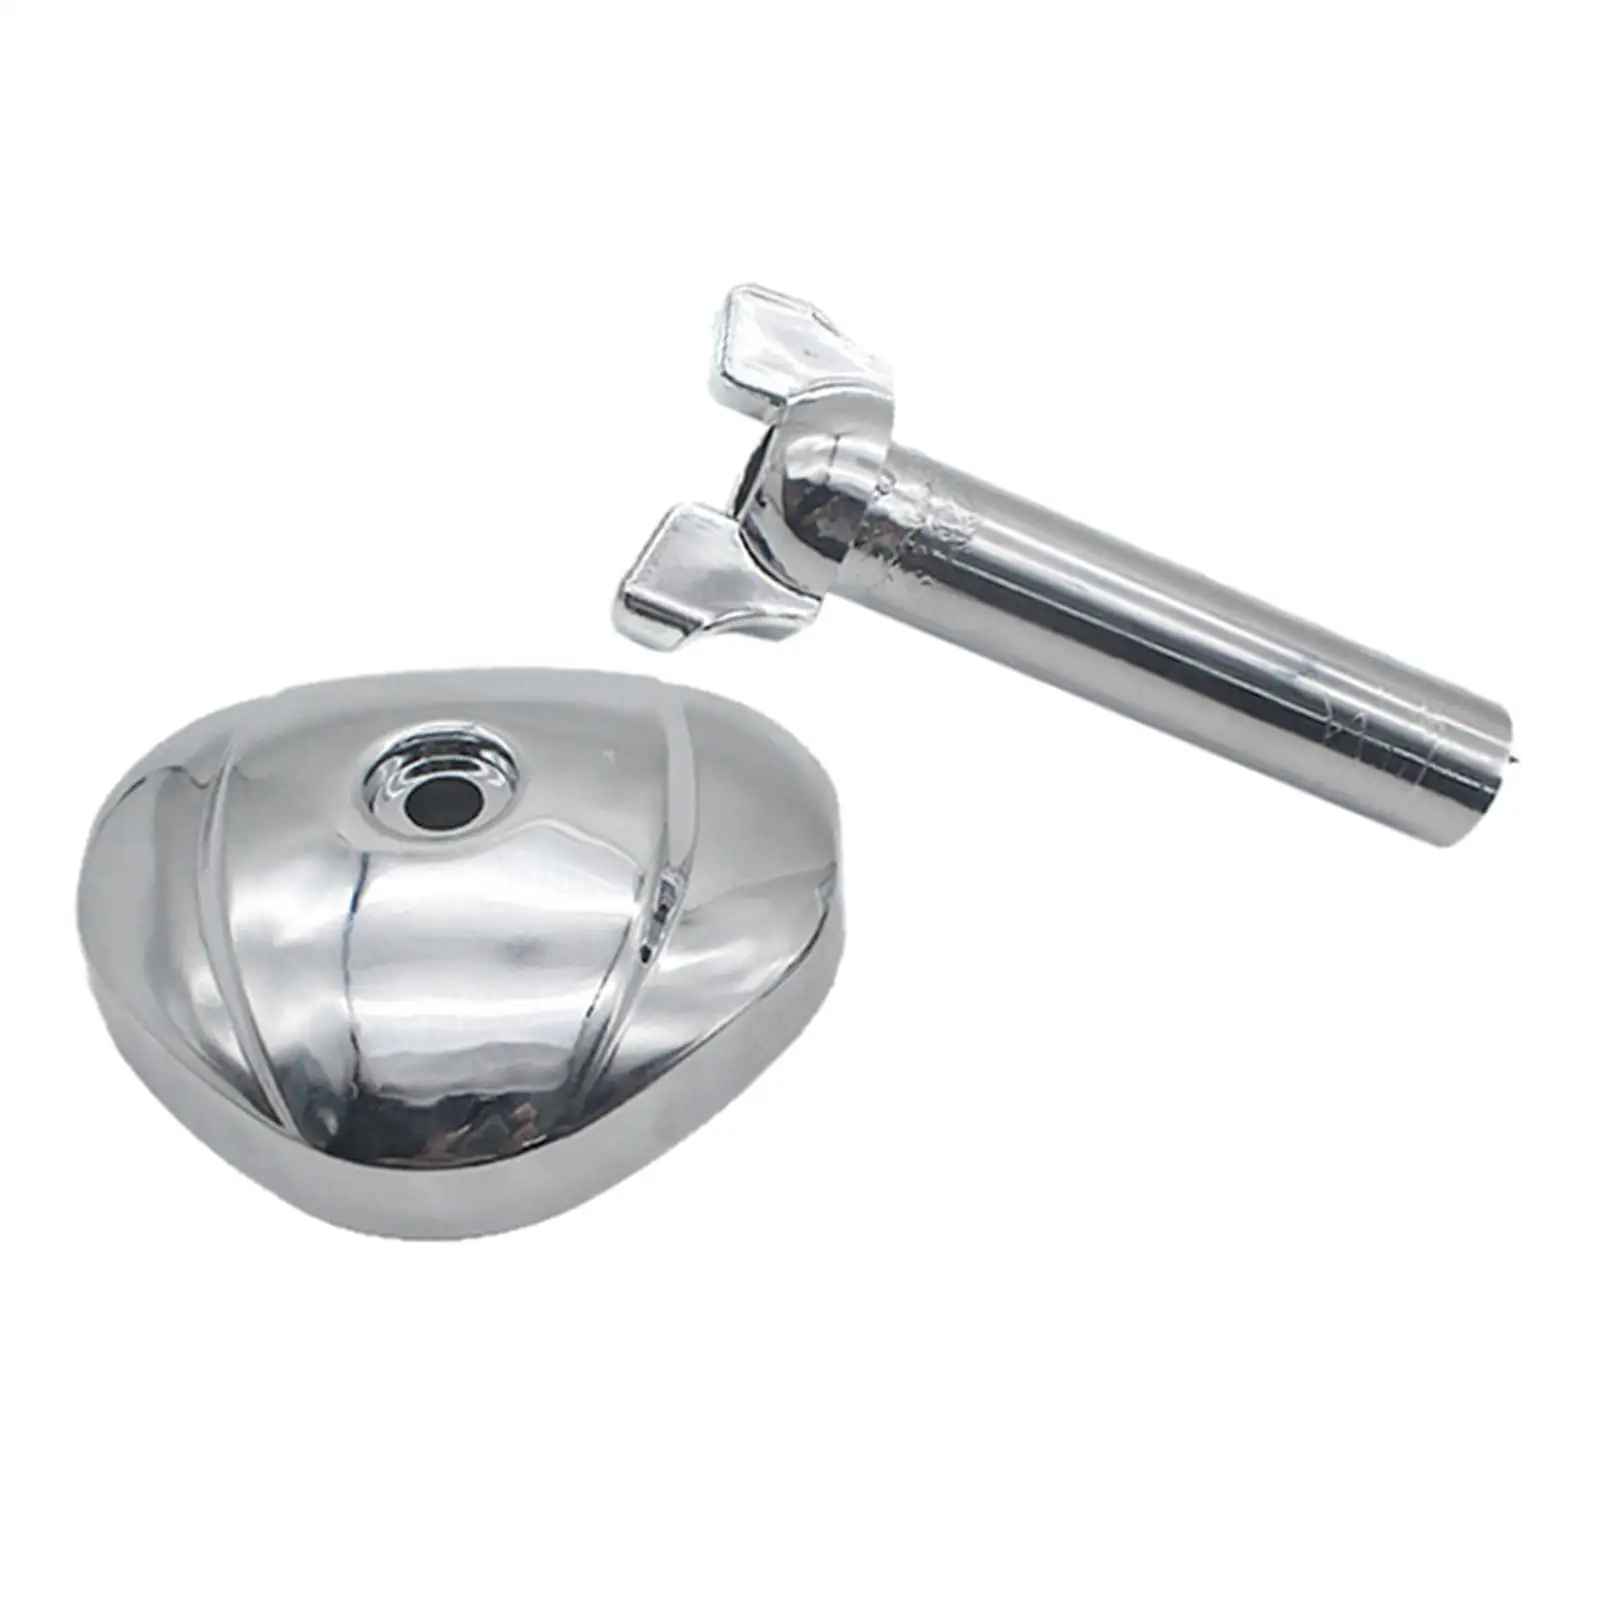  Tank Switch Handle Chrome Carburetor Cover for   400 600